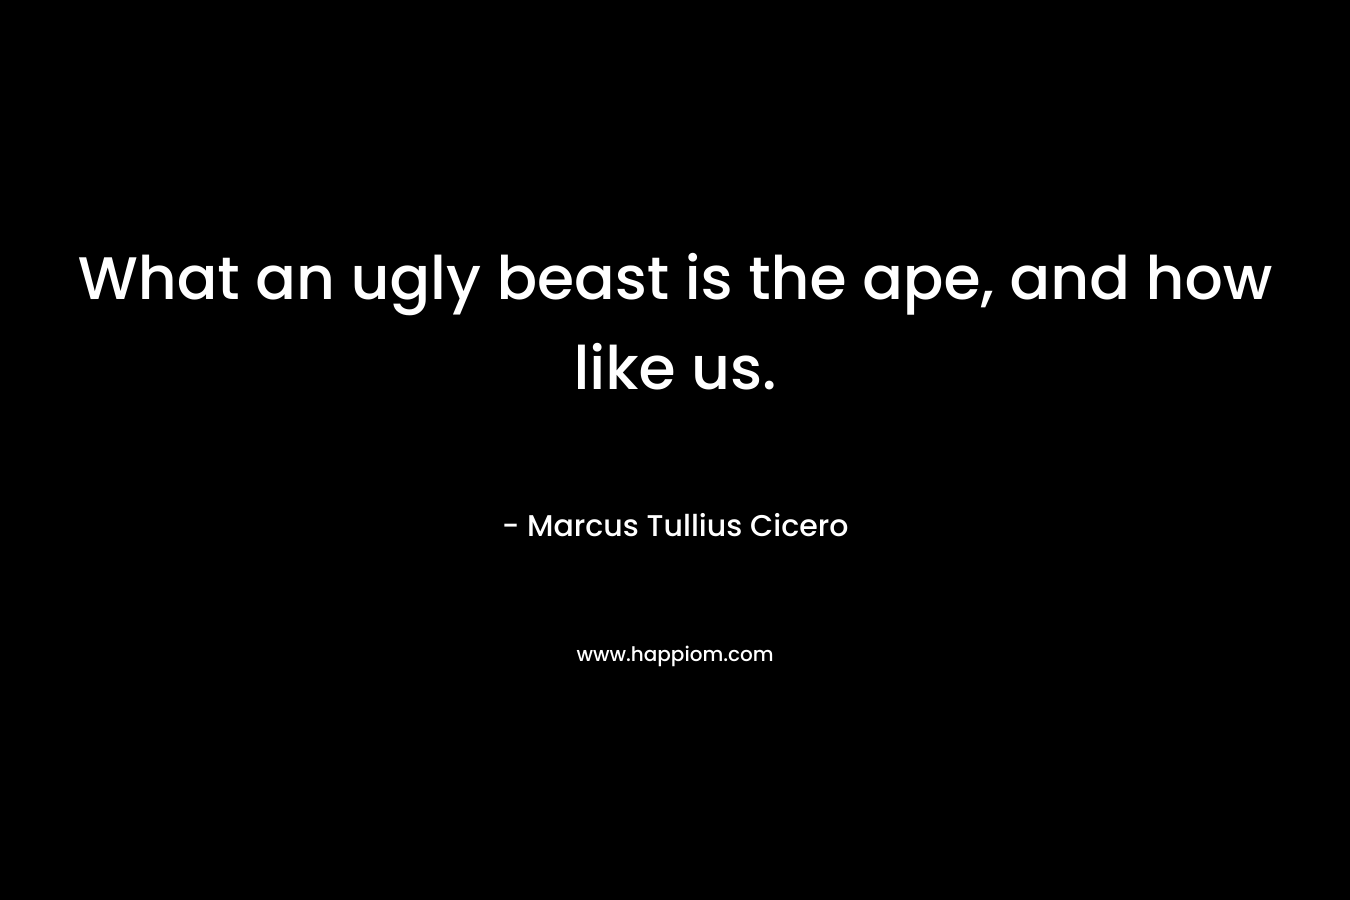 What an ugly beast is the ape, and how like us.